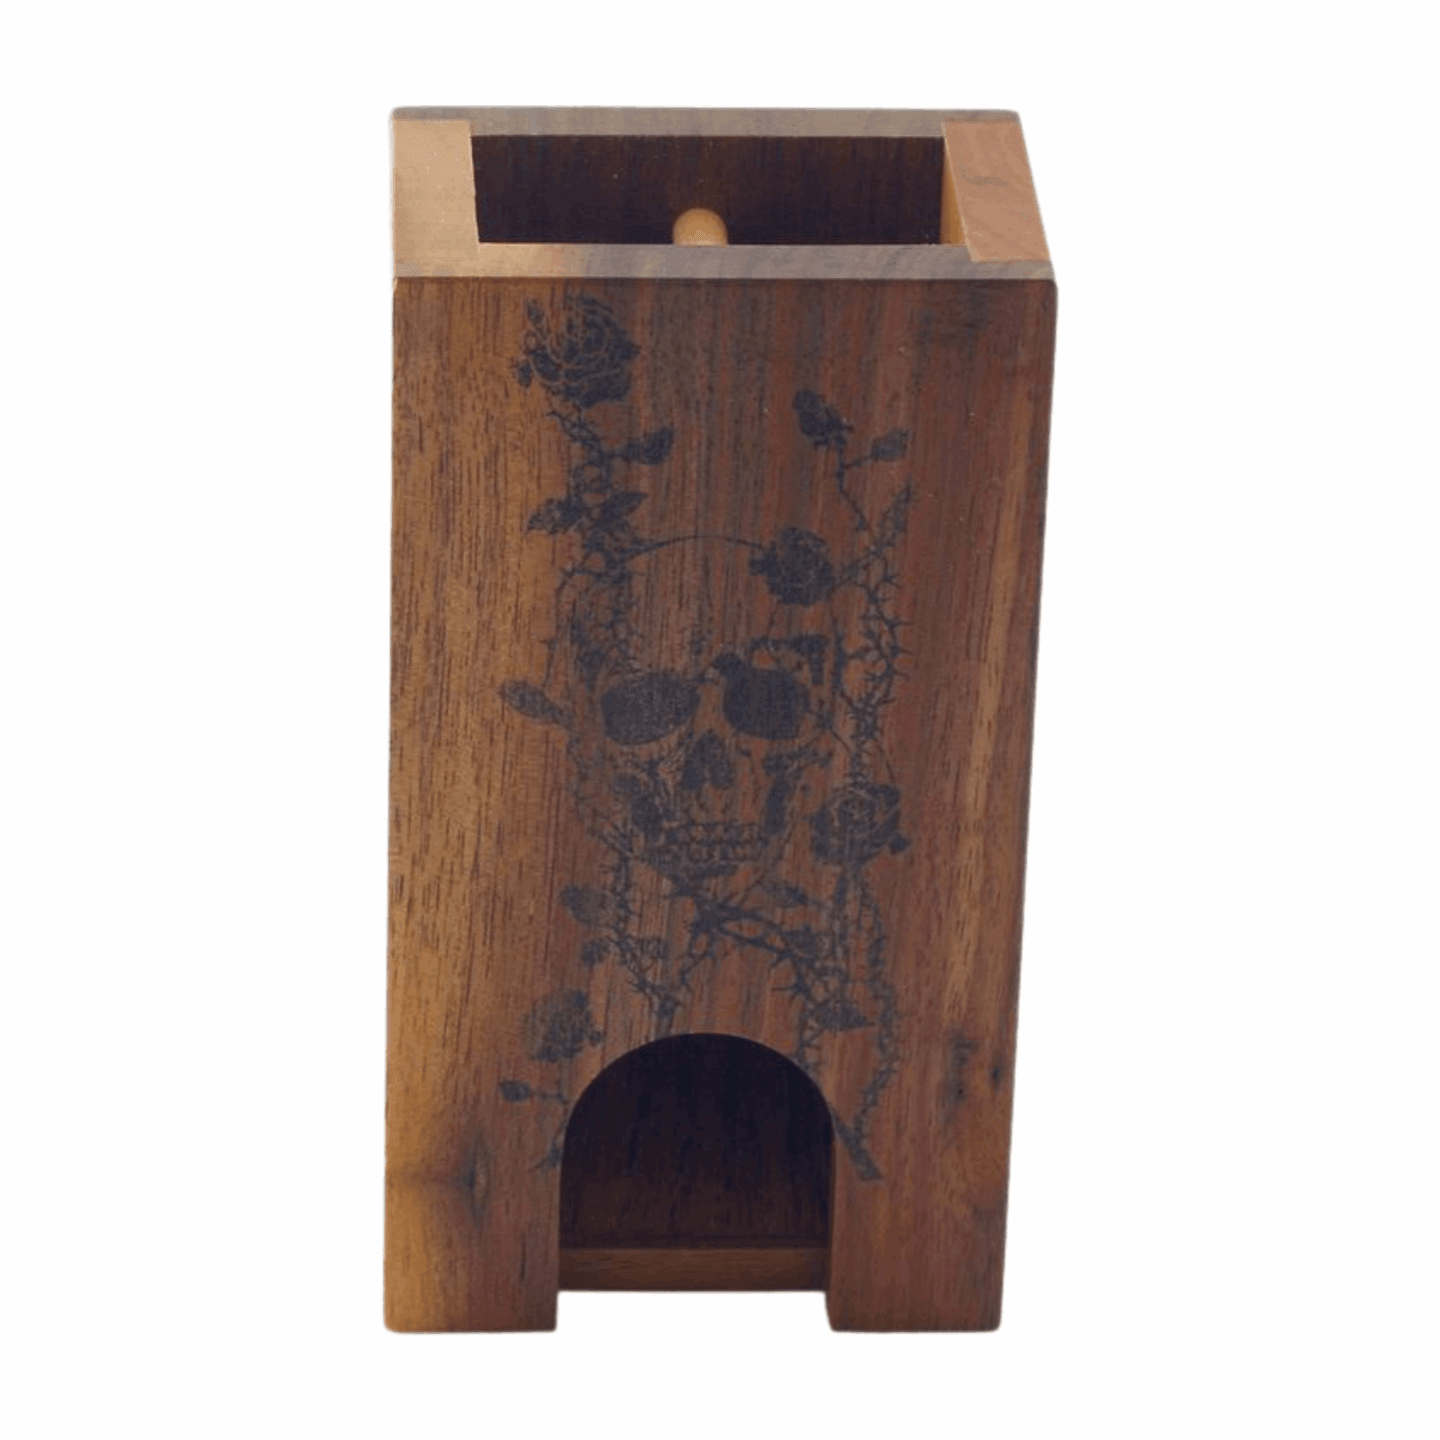 Small Walnut and Cherry Dice Tower with Skull and Roses Design - Dragon Armor Games